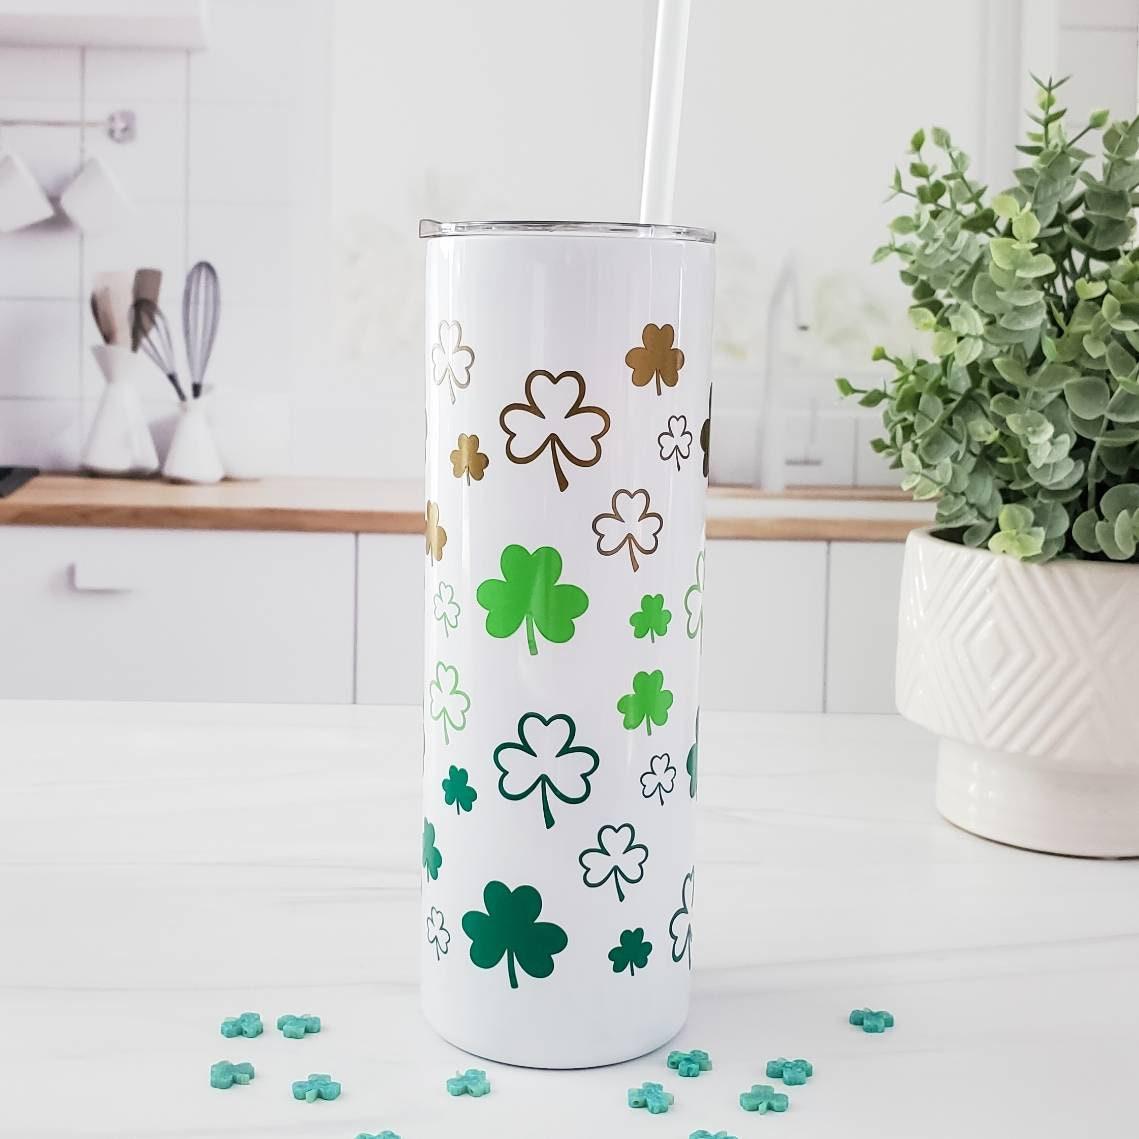 St. Patrick's Day Green Ombre Tumbler Salt and Sparkle